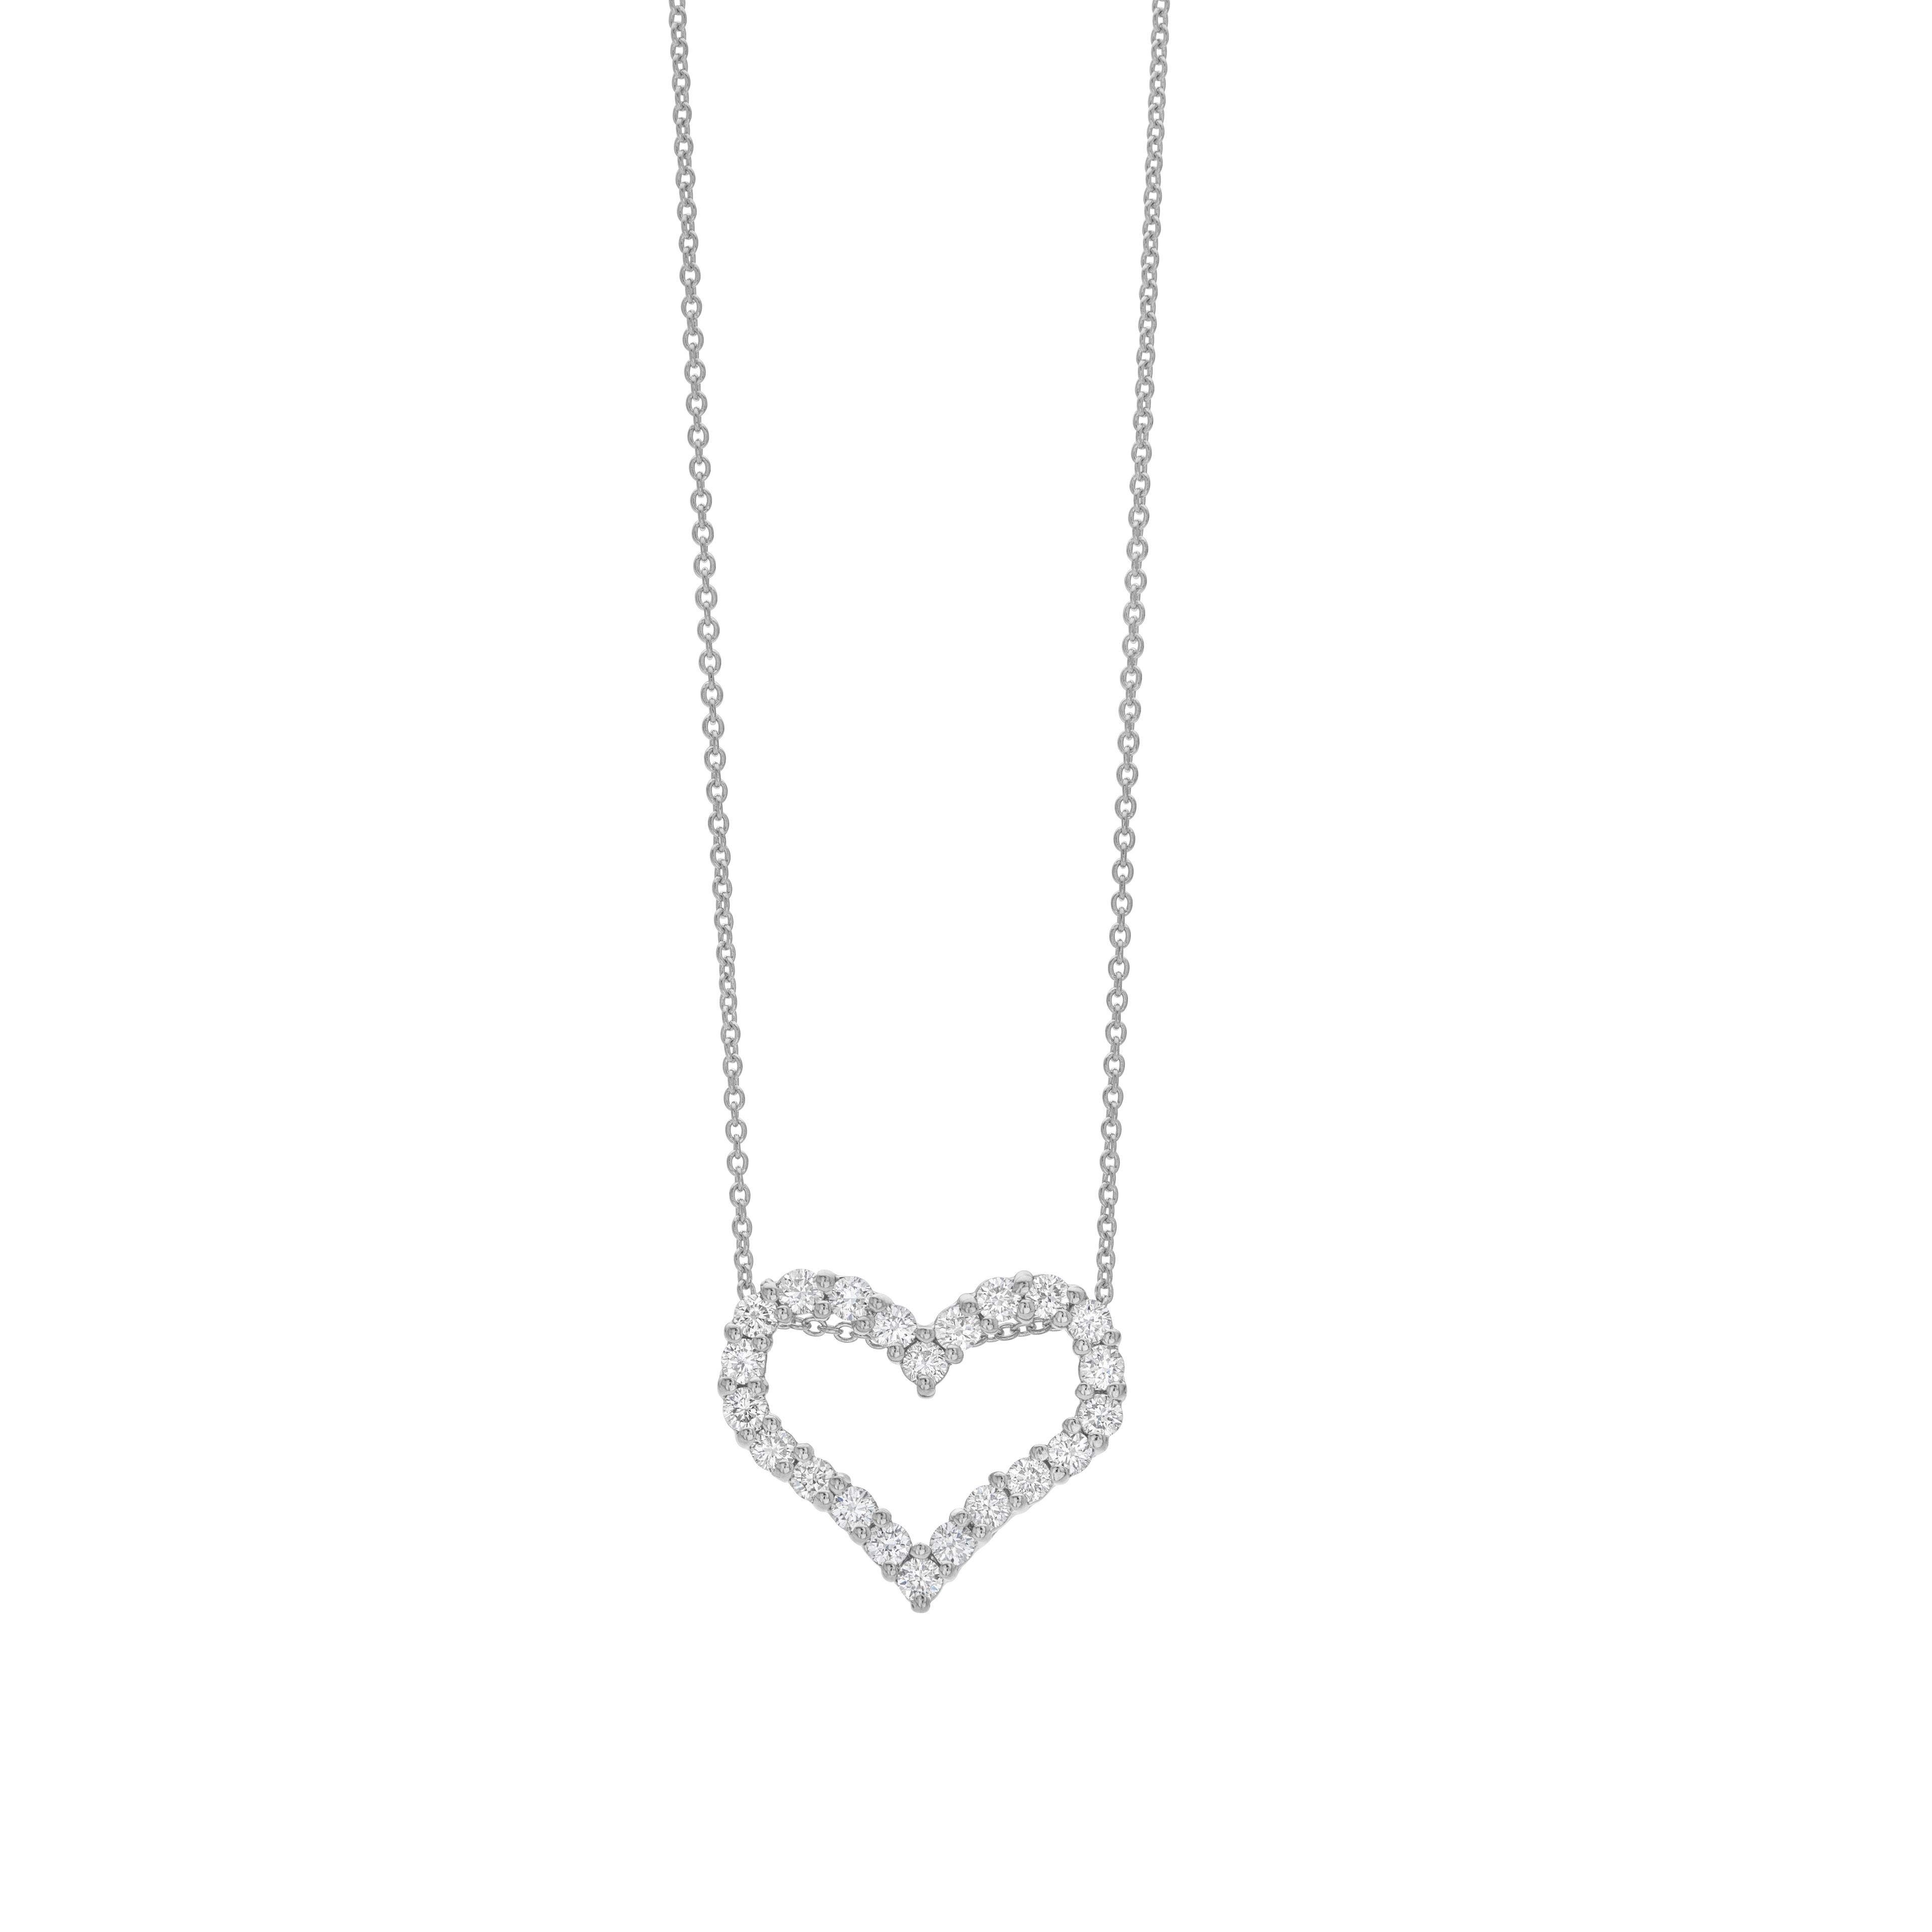 Heart Shaped Diamond Pendant Necklace in White Gold